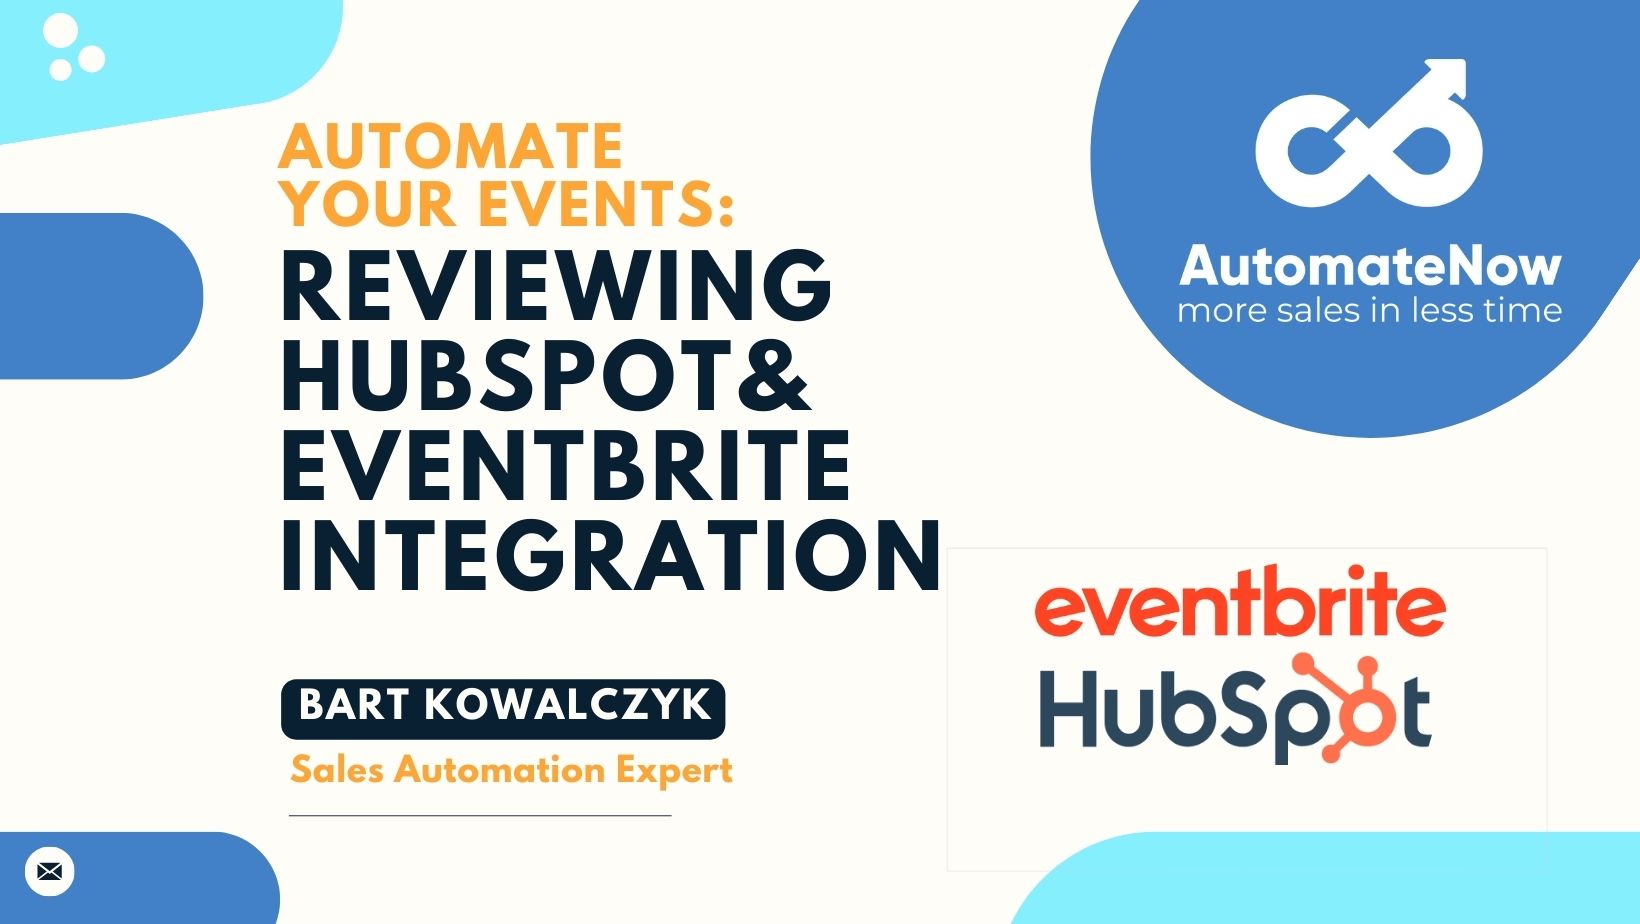 Automate your Events: Reviewing HubSpot & Eventbrite Integration